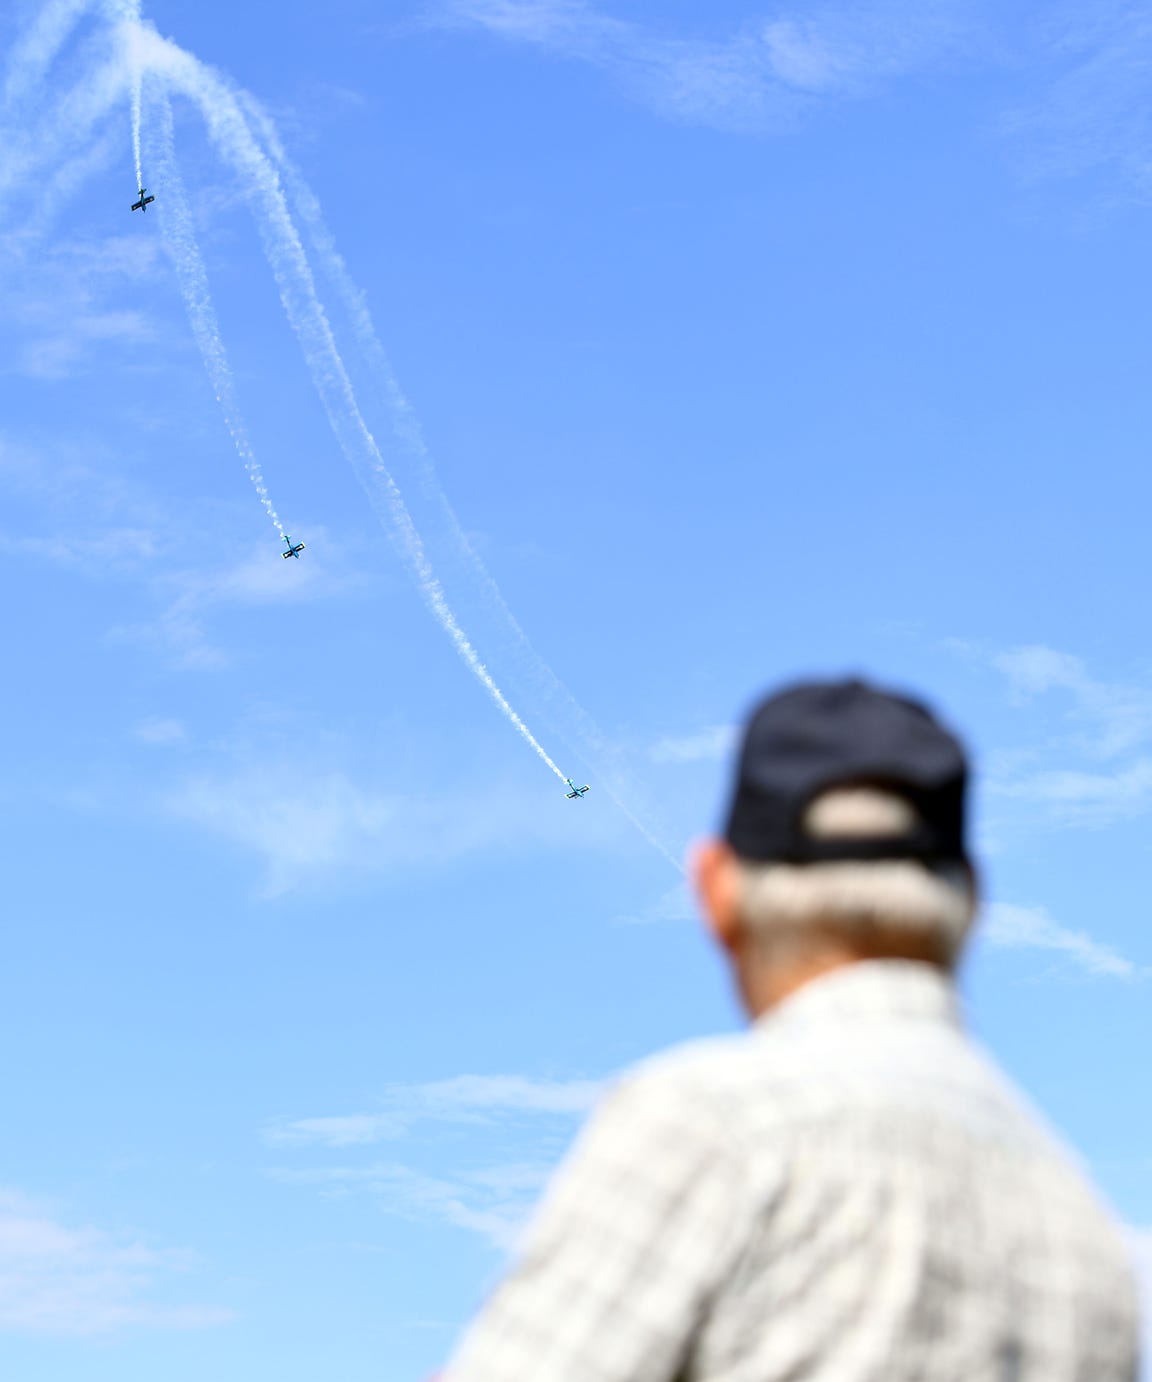 Paul Harms watches the Vanguard Squadron perform at the Sioux Falls Air Show on Saturday, August 17, 2019 at the South Dakota Air National Guard base. Harms said he used to work on a military tanker responsible for refeuling aircrafts mid-flight. 